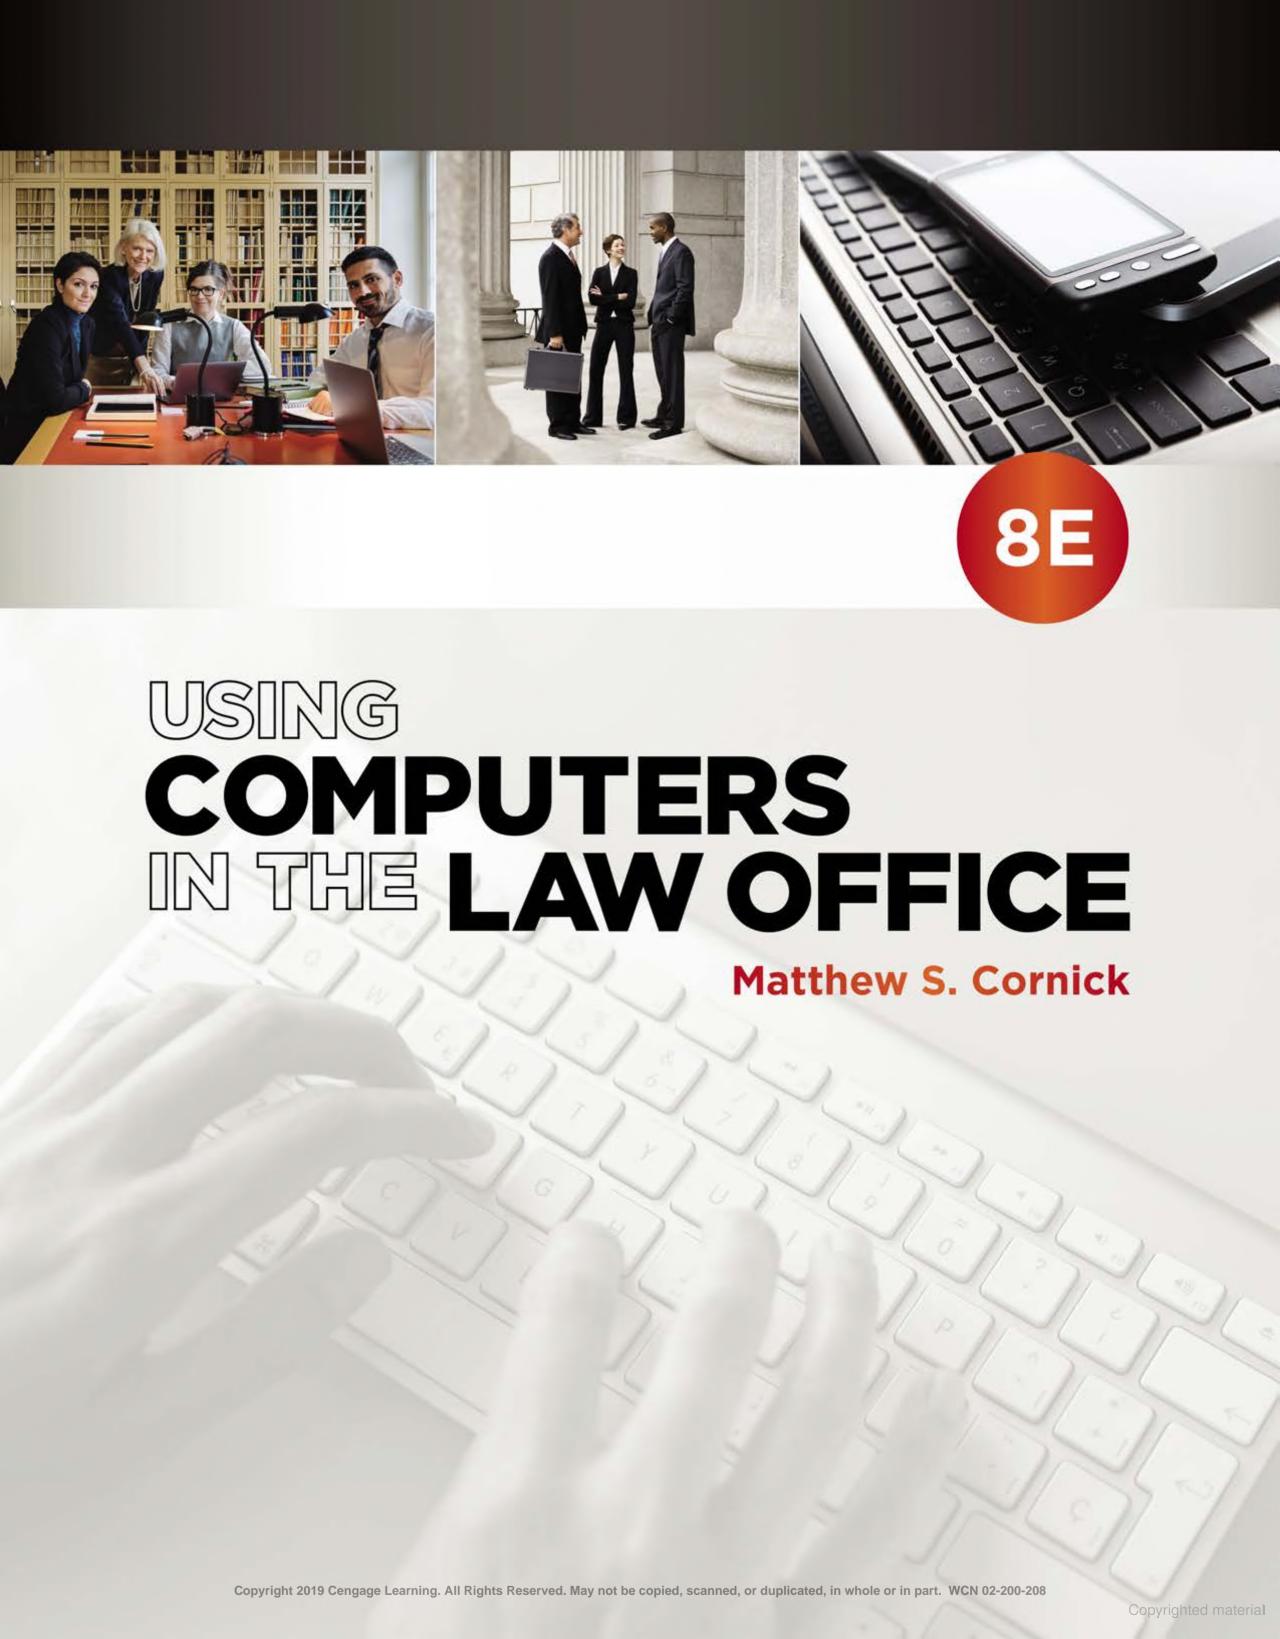 Using computers in the law office